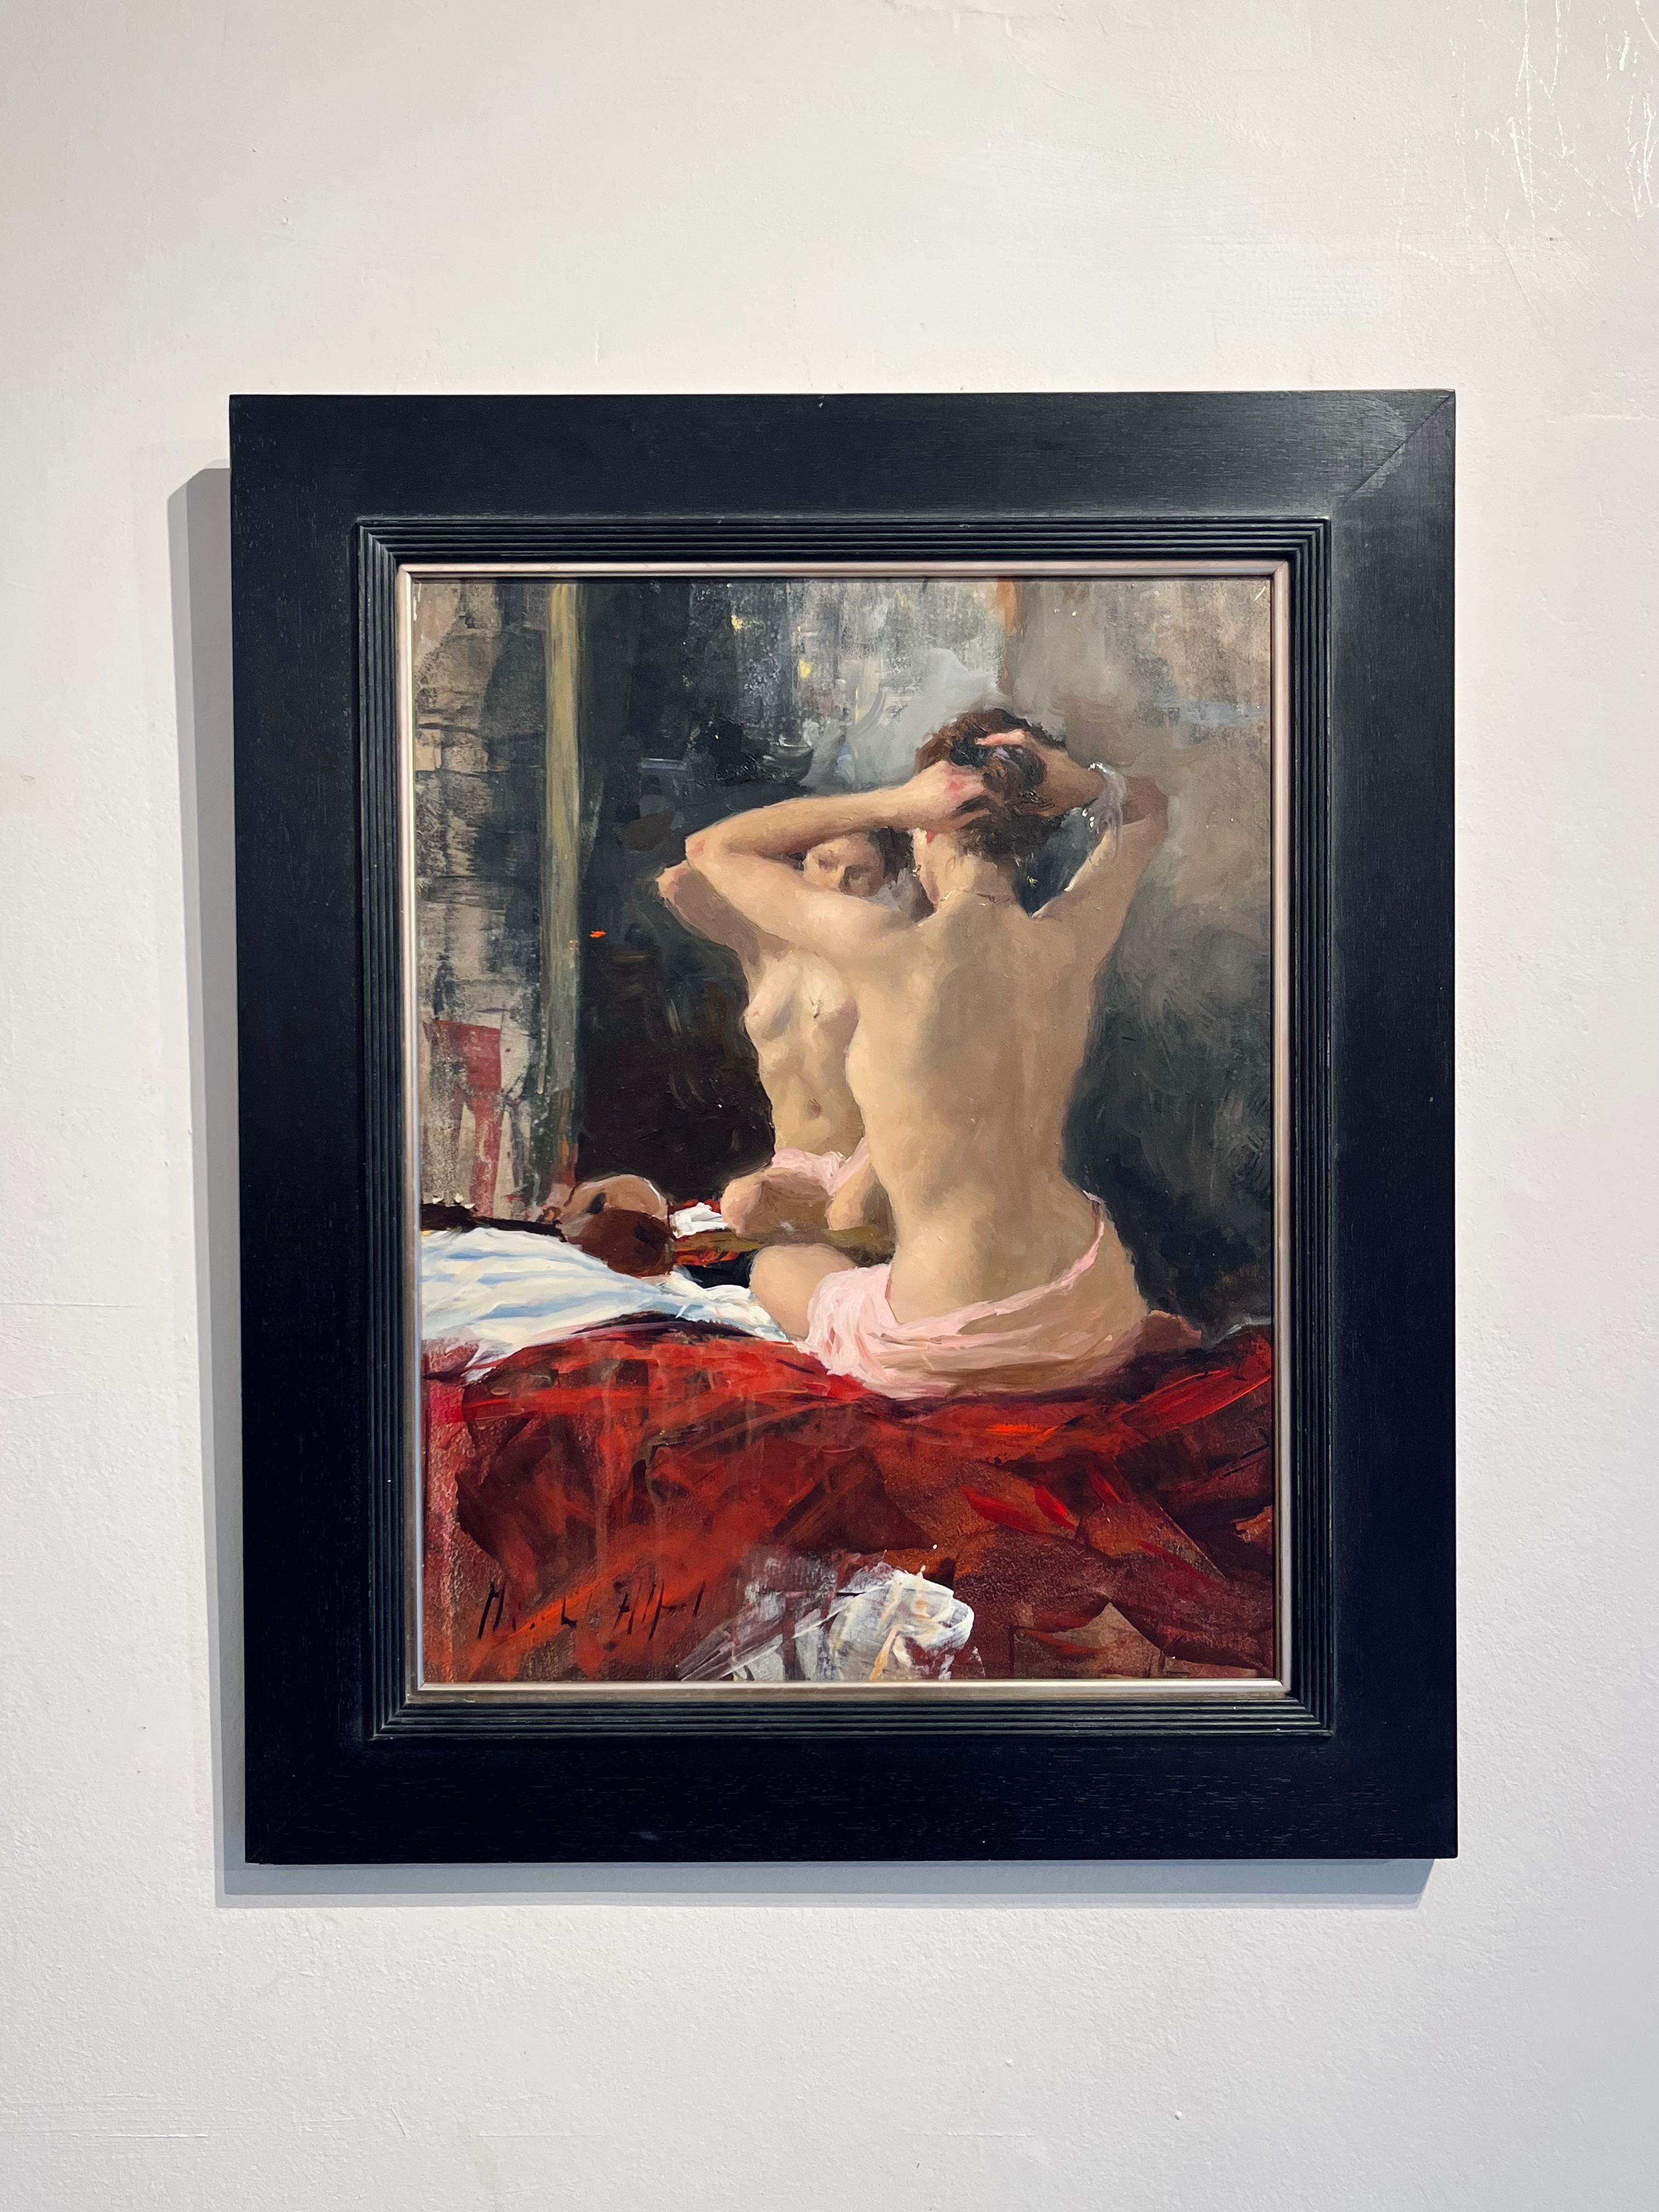 Nude, Reflection - original impressionist female figure study - contemporary art - Painting by Michael Alford